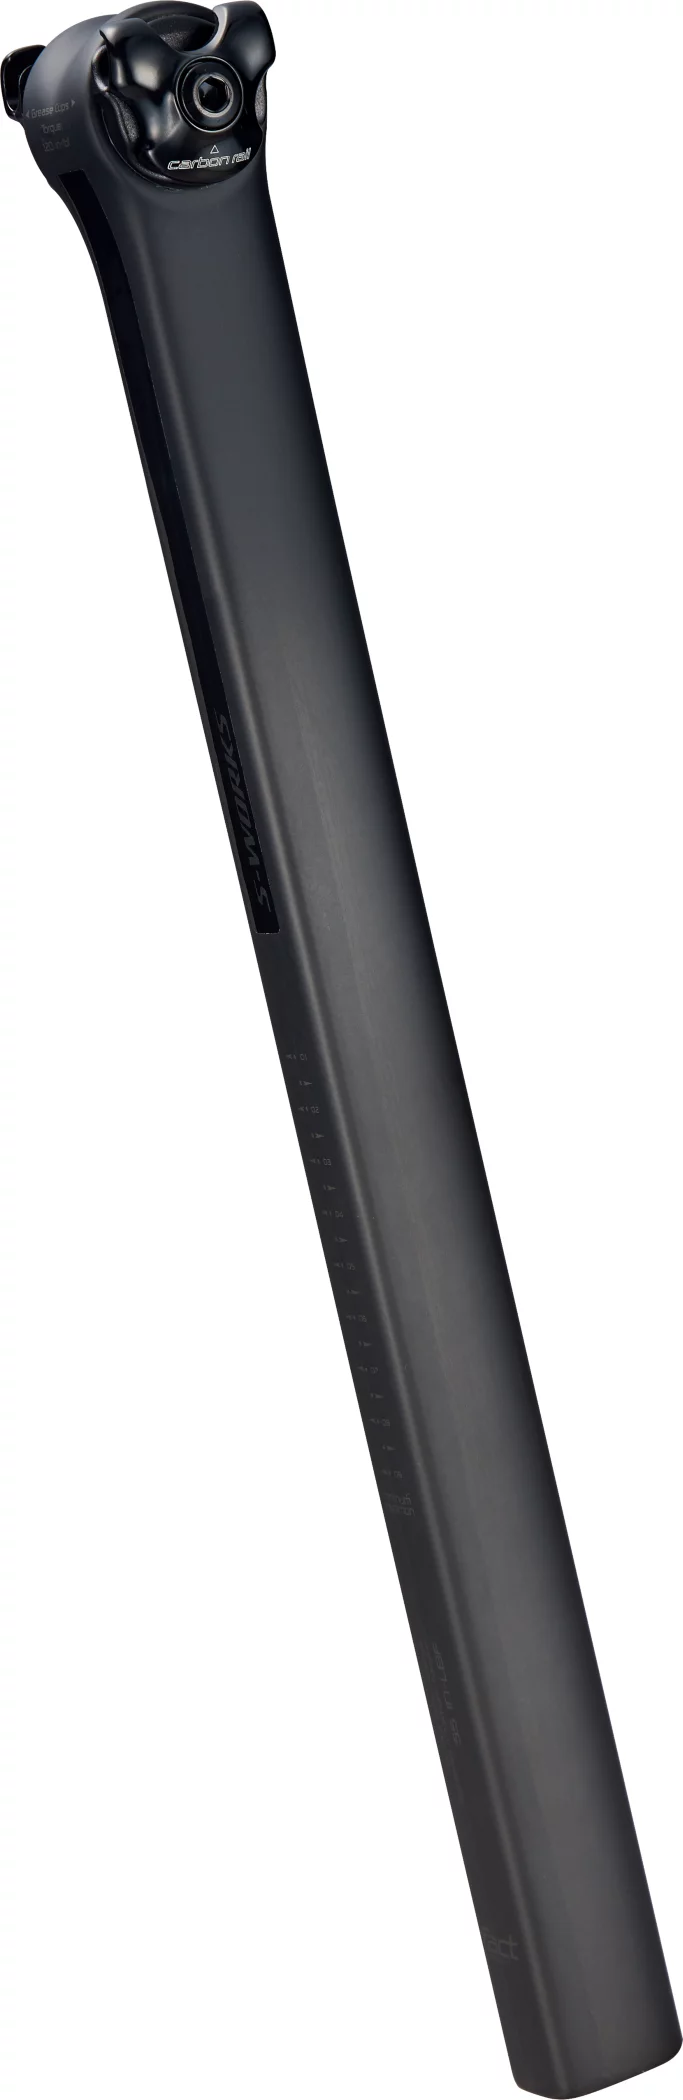 S-Works_Pave_SL_Carbon_Seatpost